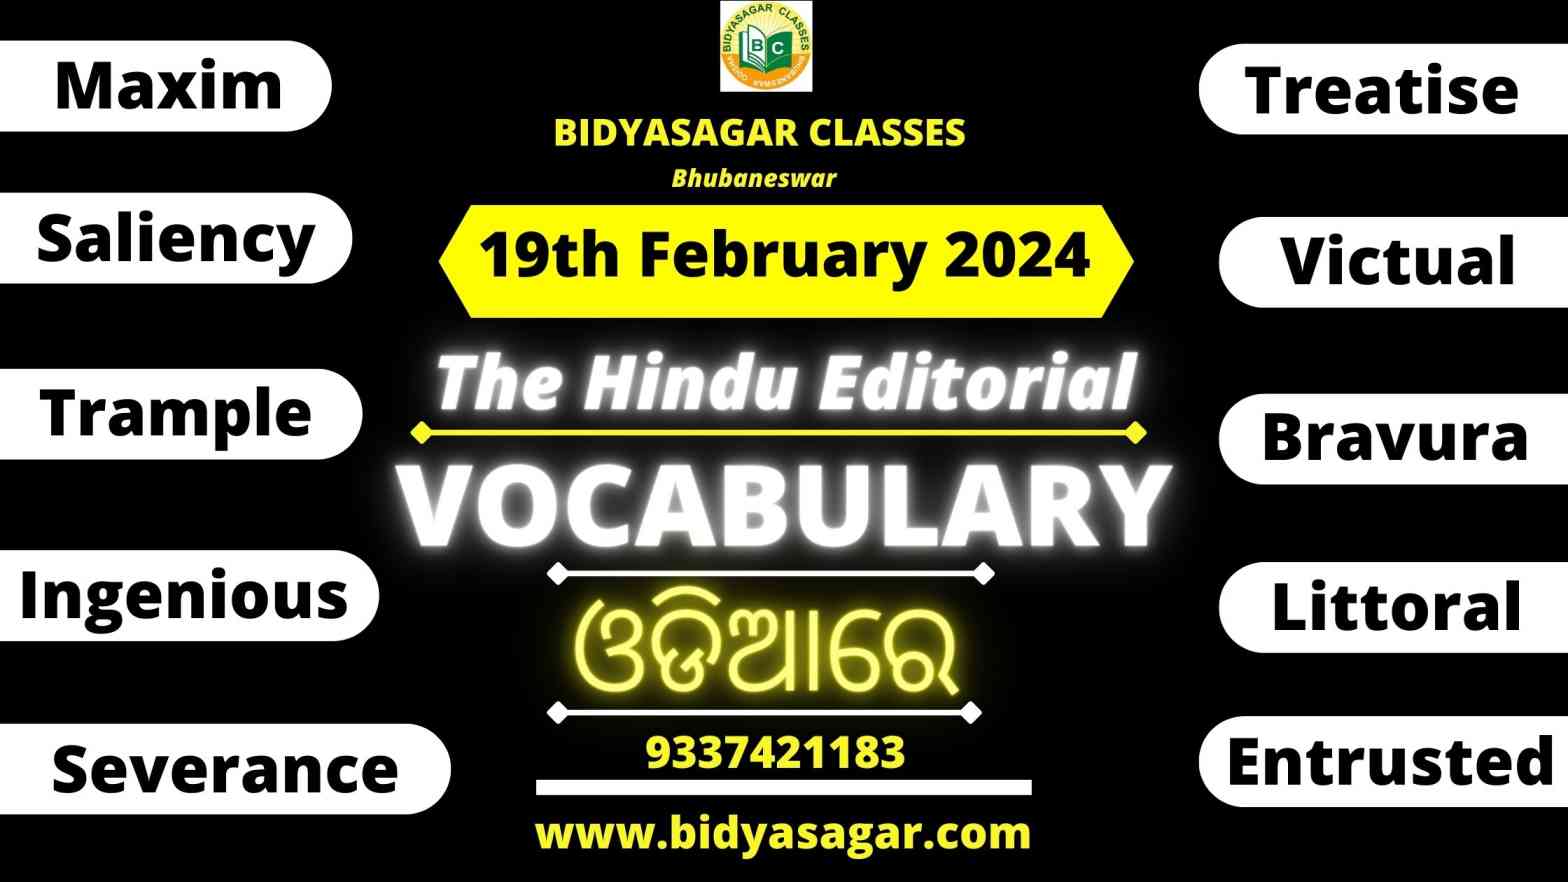 The Hindu Editorial Vocabulary of 19th February 2024